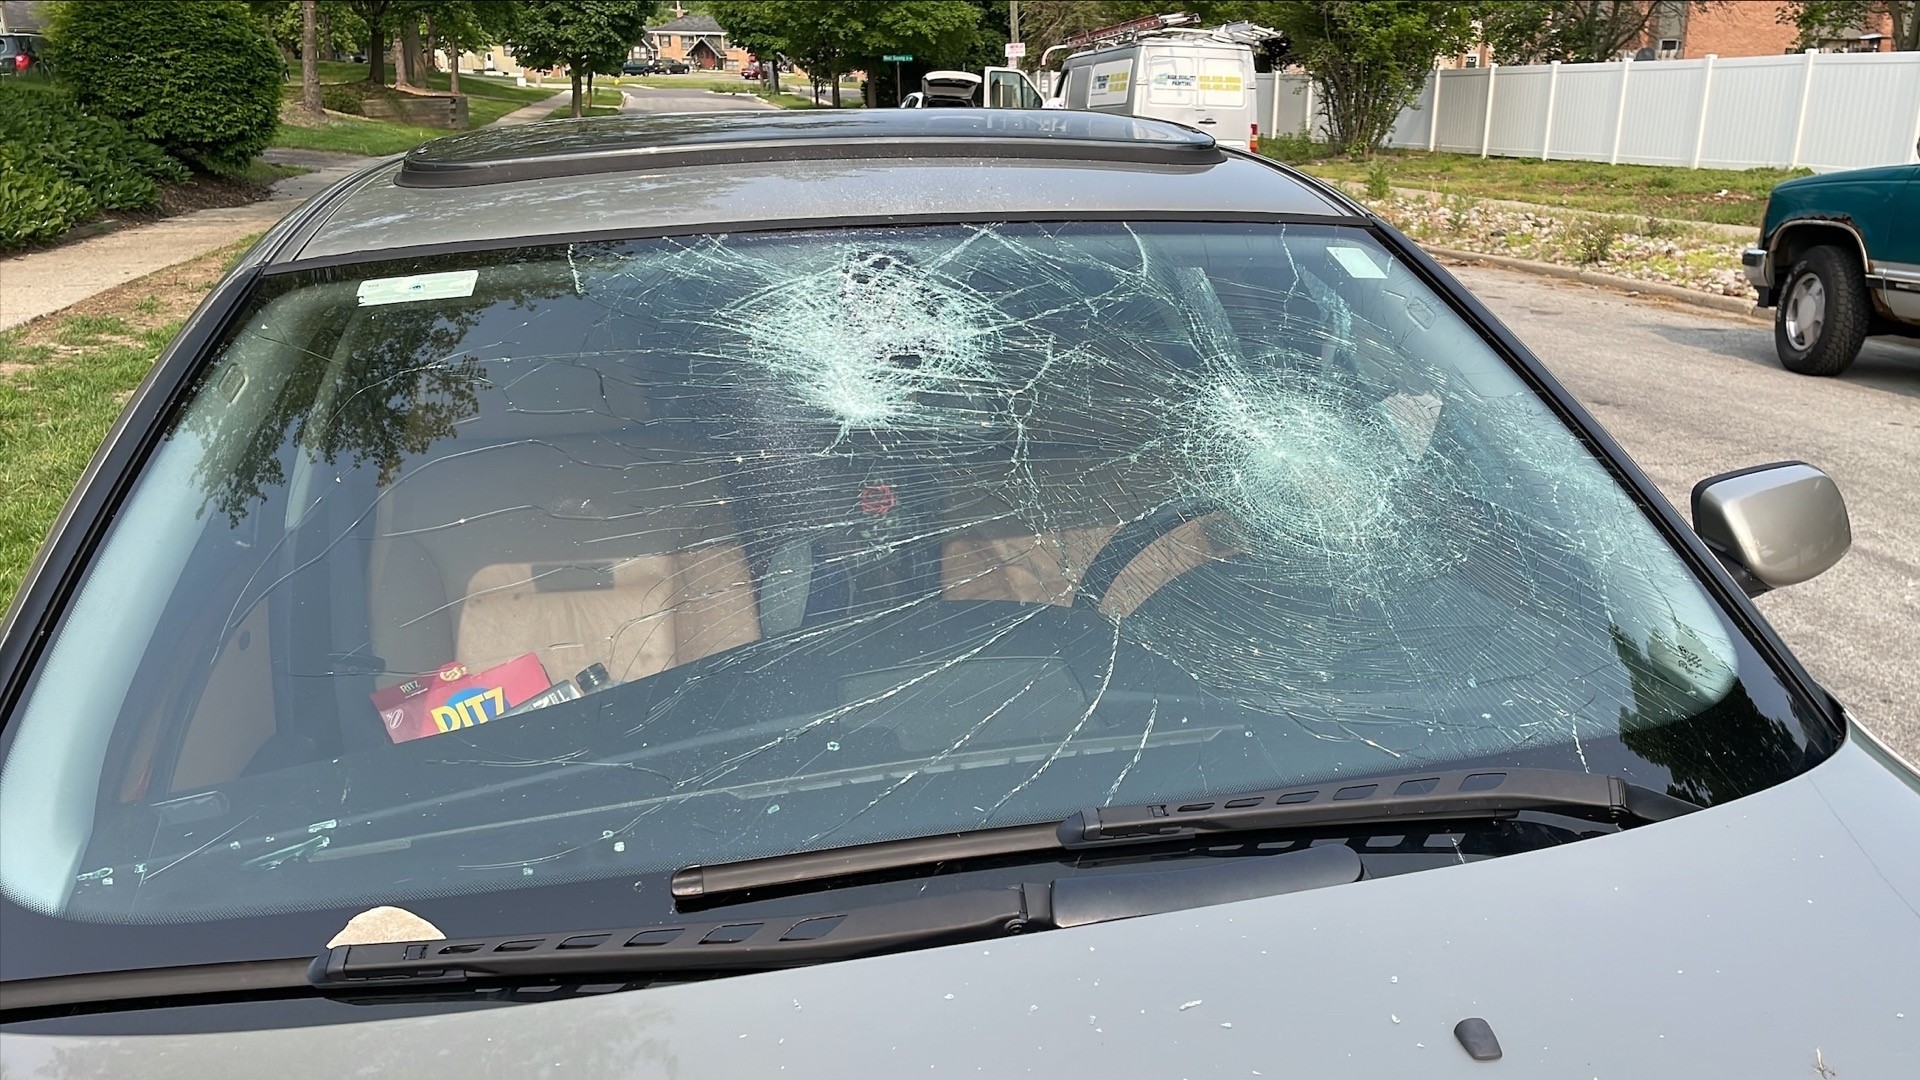 A man has been arrested after he allegedly threw rocks at multiple parked cars along 42nd Street and Kalamazoo Avenue in Grand Rapids.